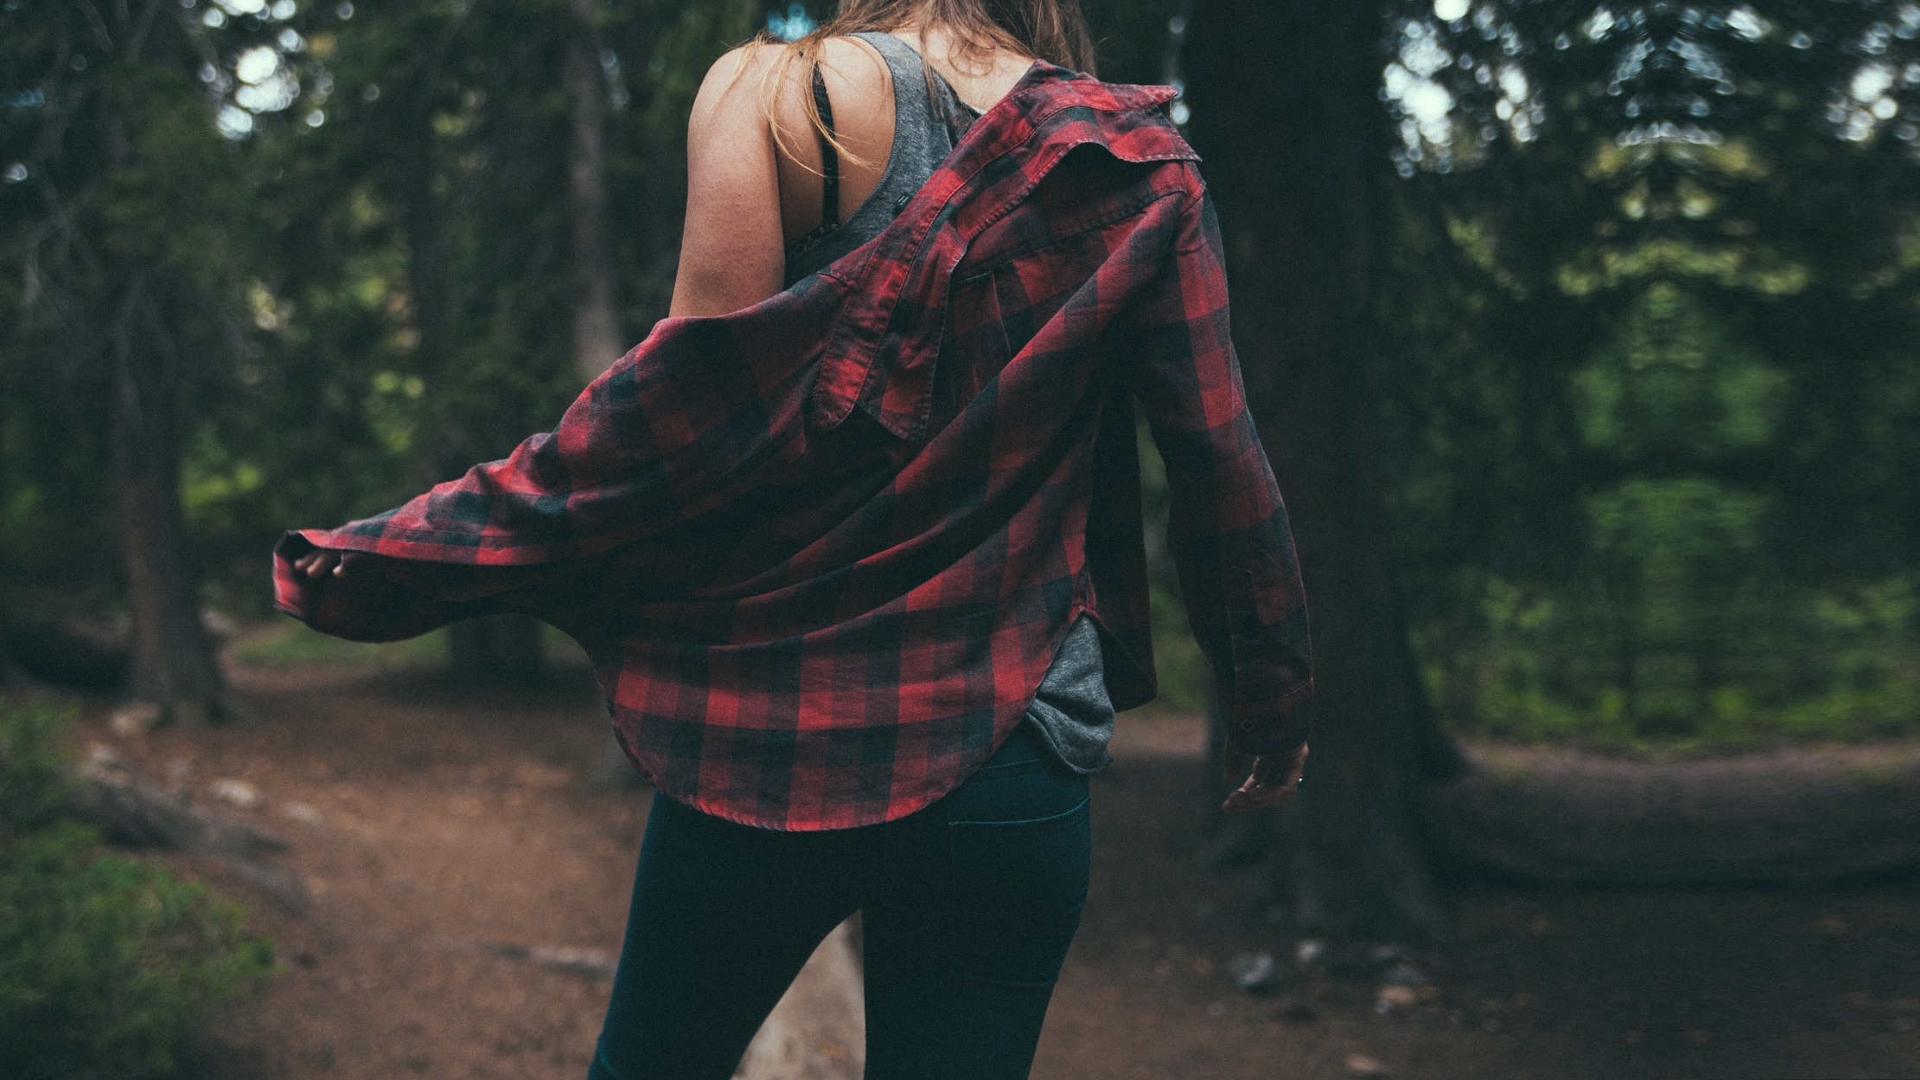 People 1920x1080 forest women outdoors photography back Chill Out crisromagosa depth of field plaid shirt model landscape nature women outdoors standing